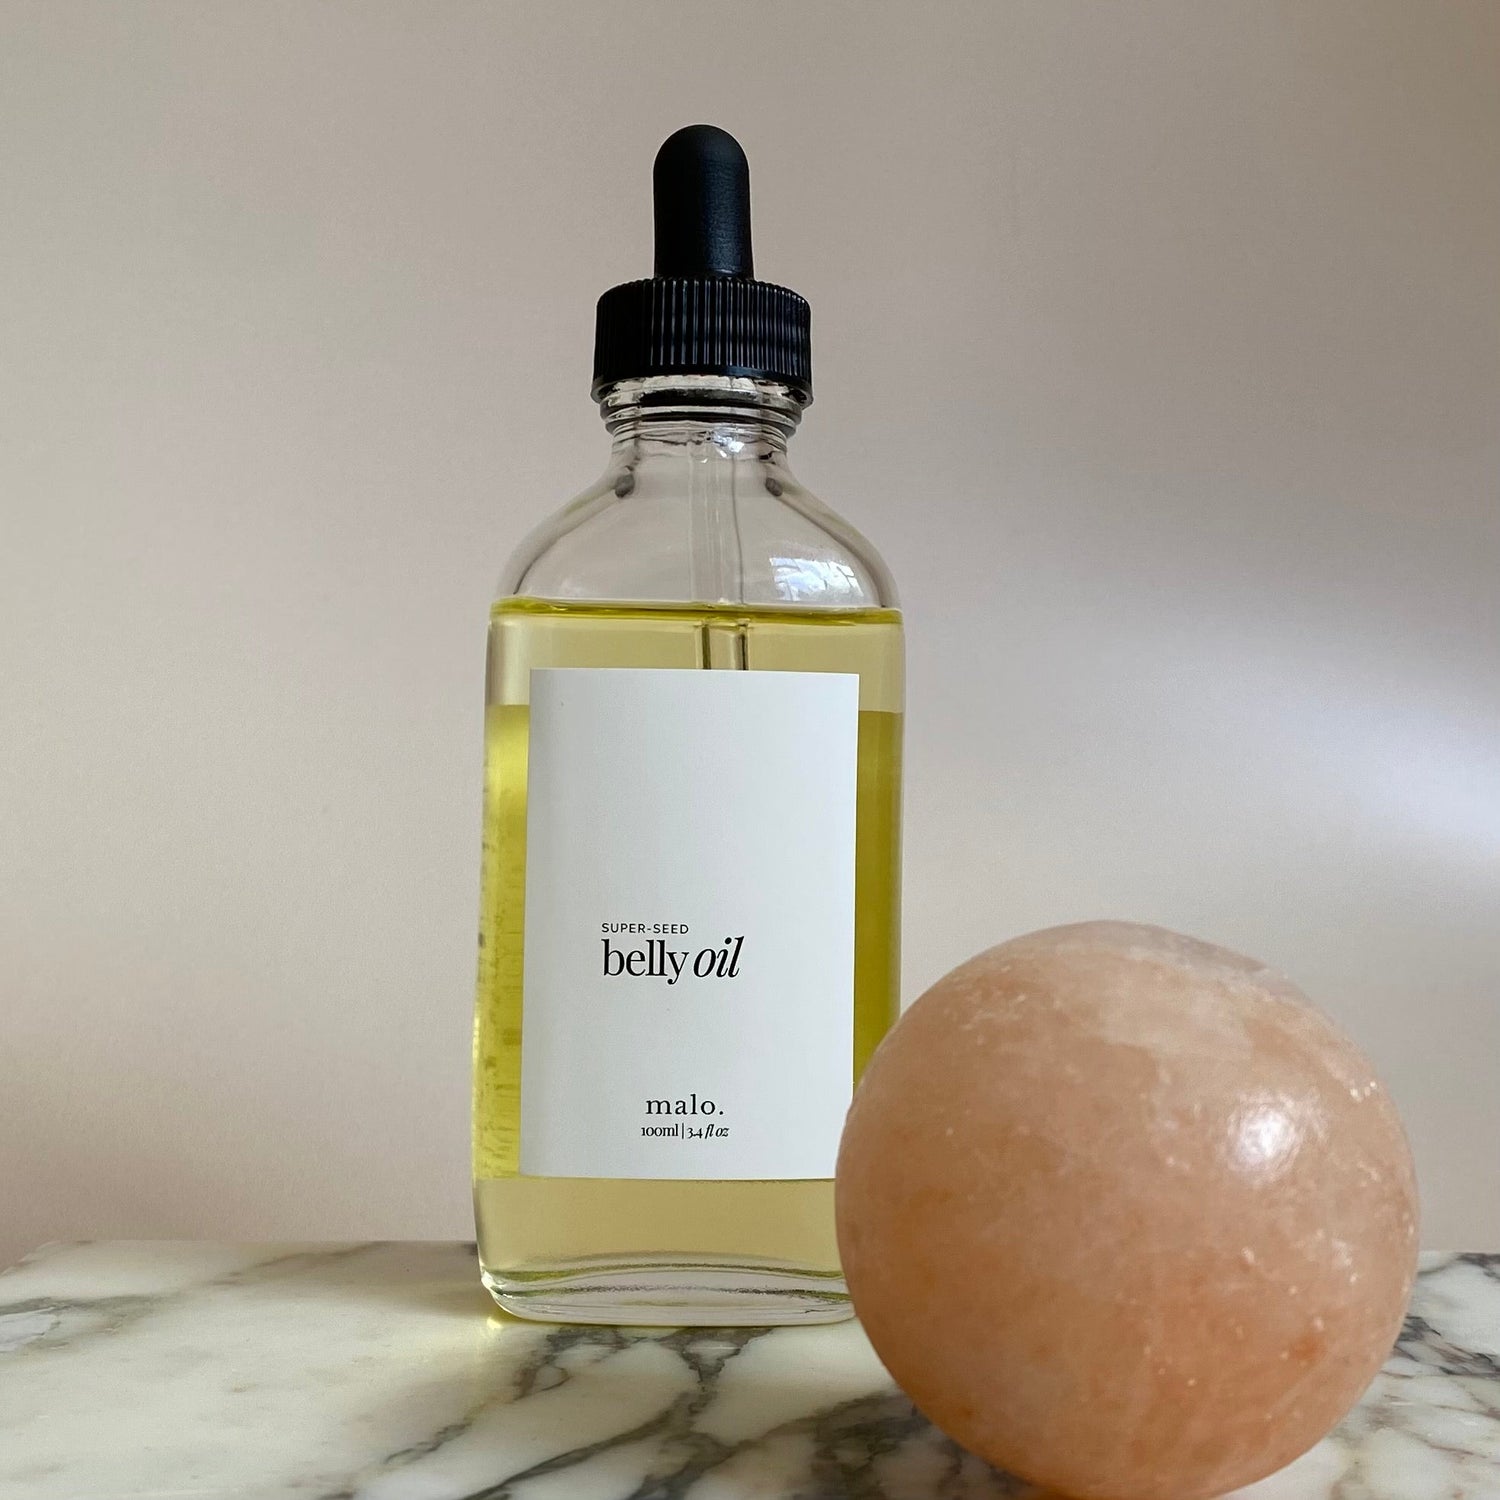 SUPER-SEED BELLY OIL